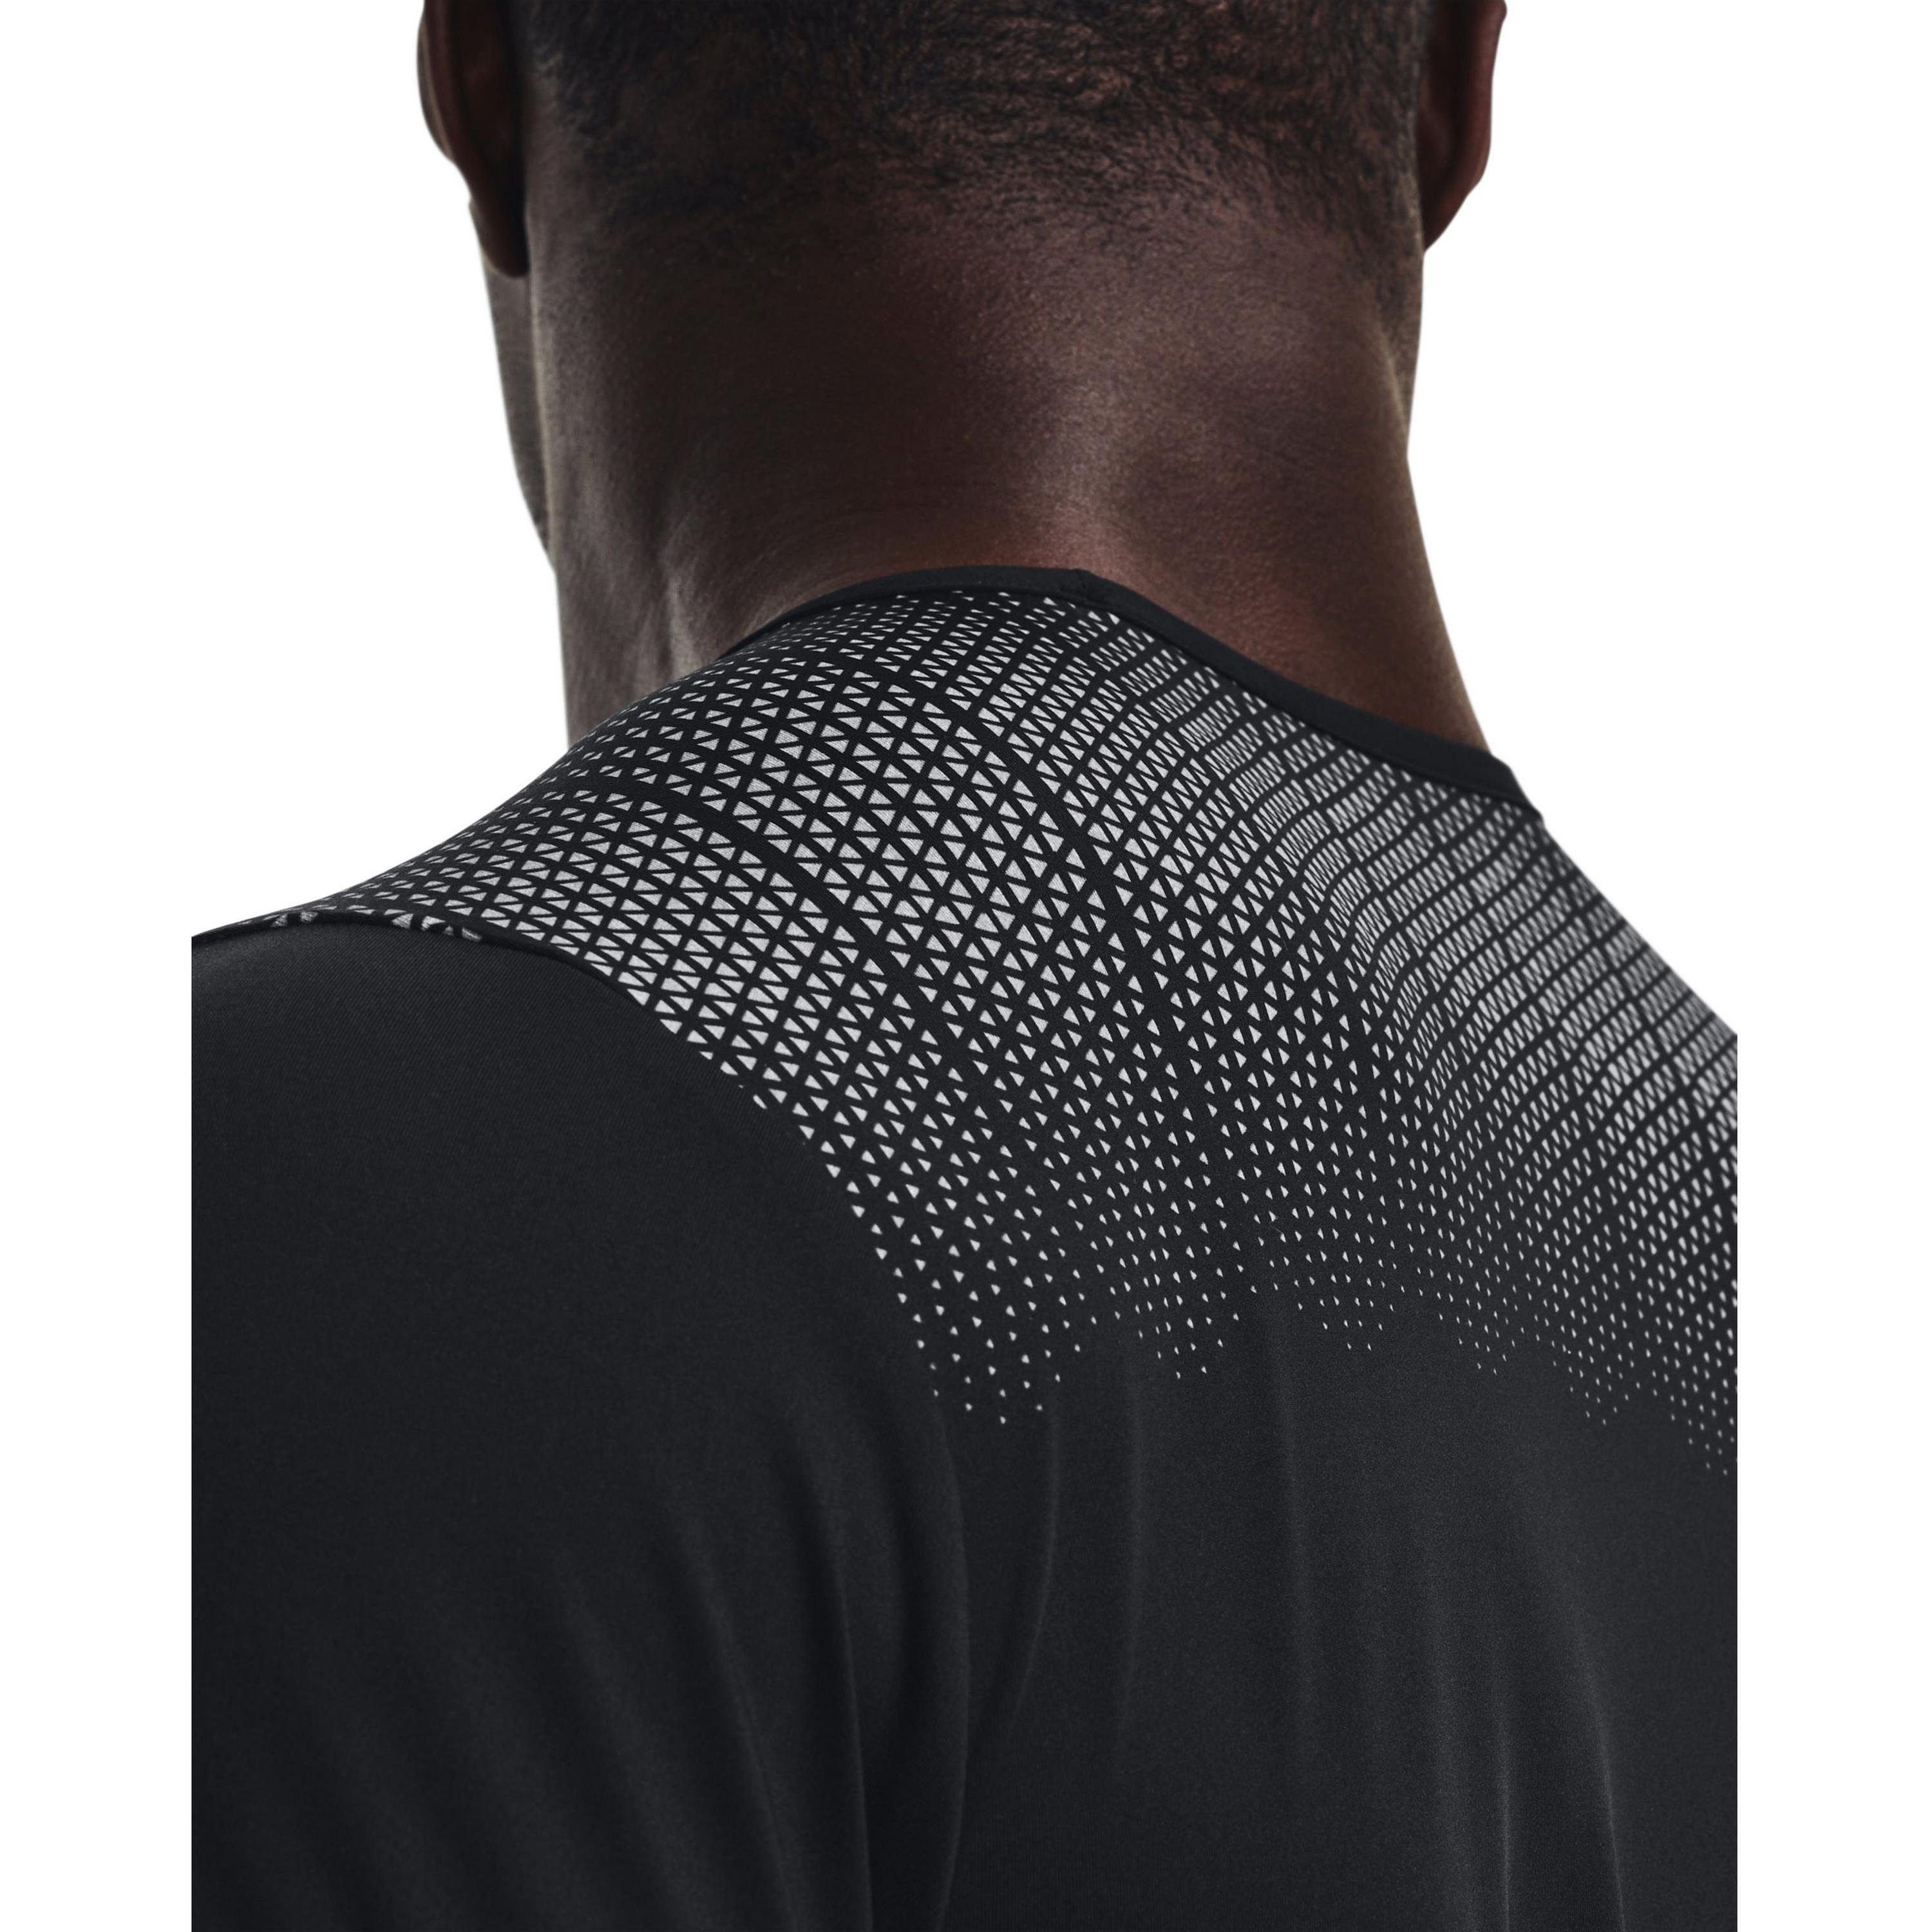 Under Armour® Funktionsshirt Armour black-white